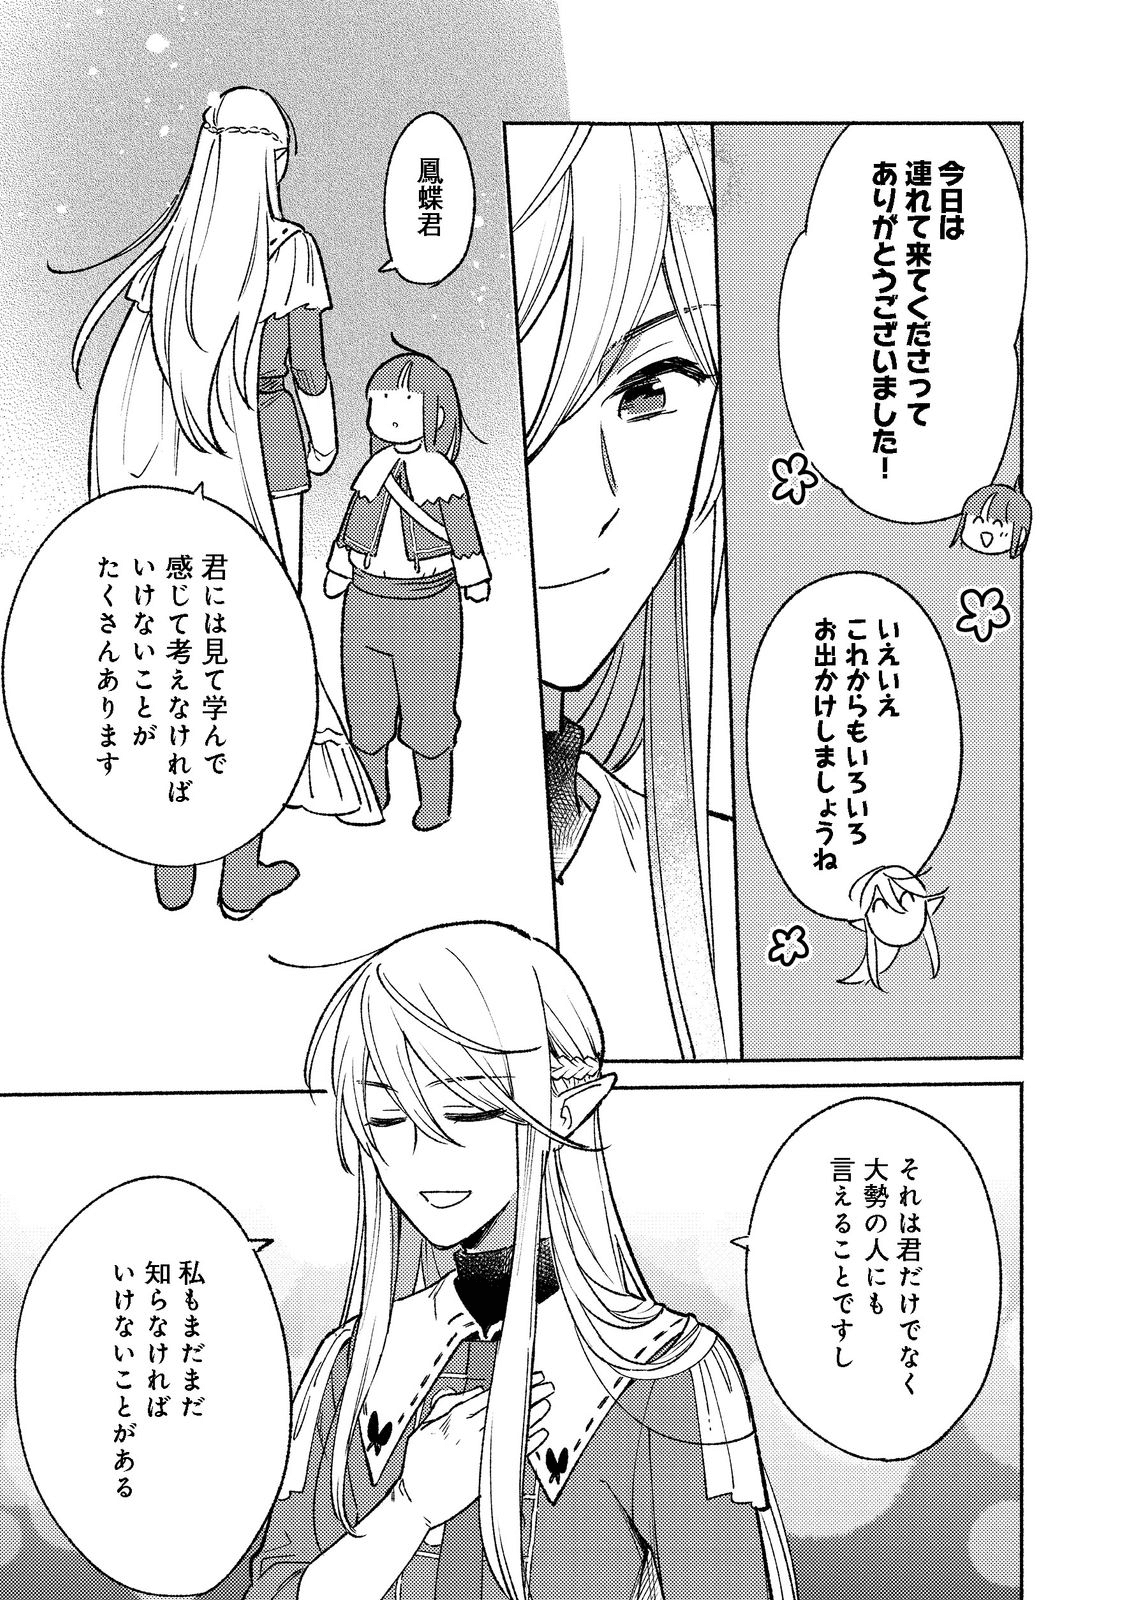 I’m the White Pig Nobleman 第15.2話 - Page 21